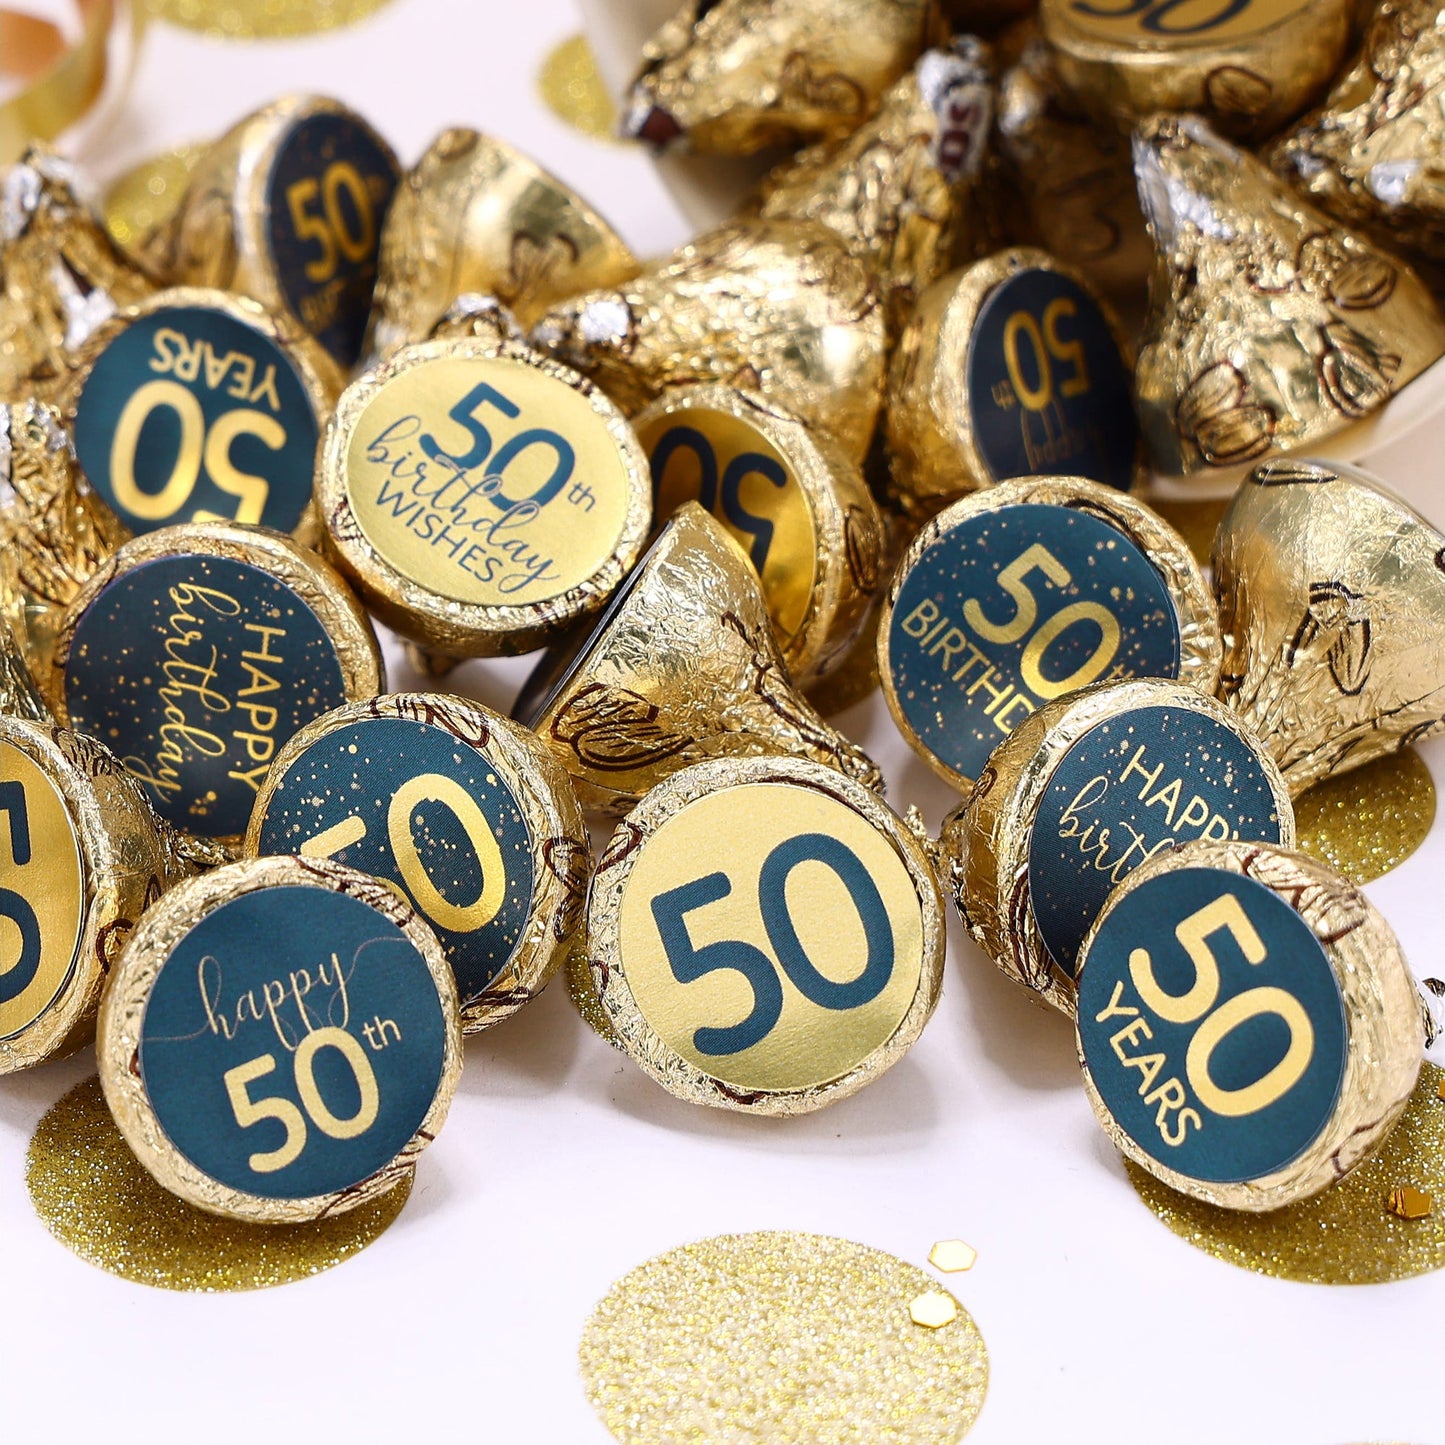 Premium navy blue and gold foil stickers perfect for decorating candy for an 50th birthday party